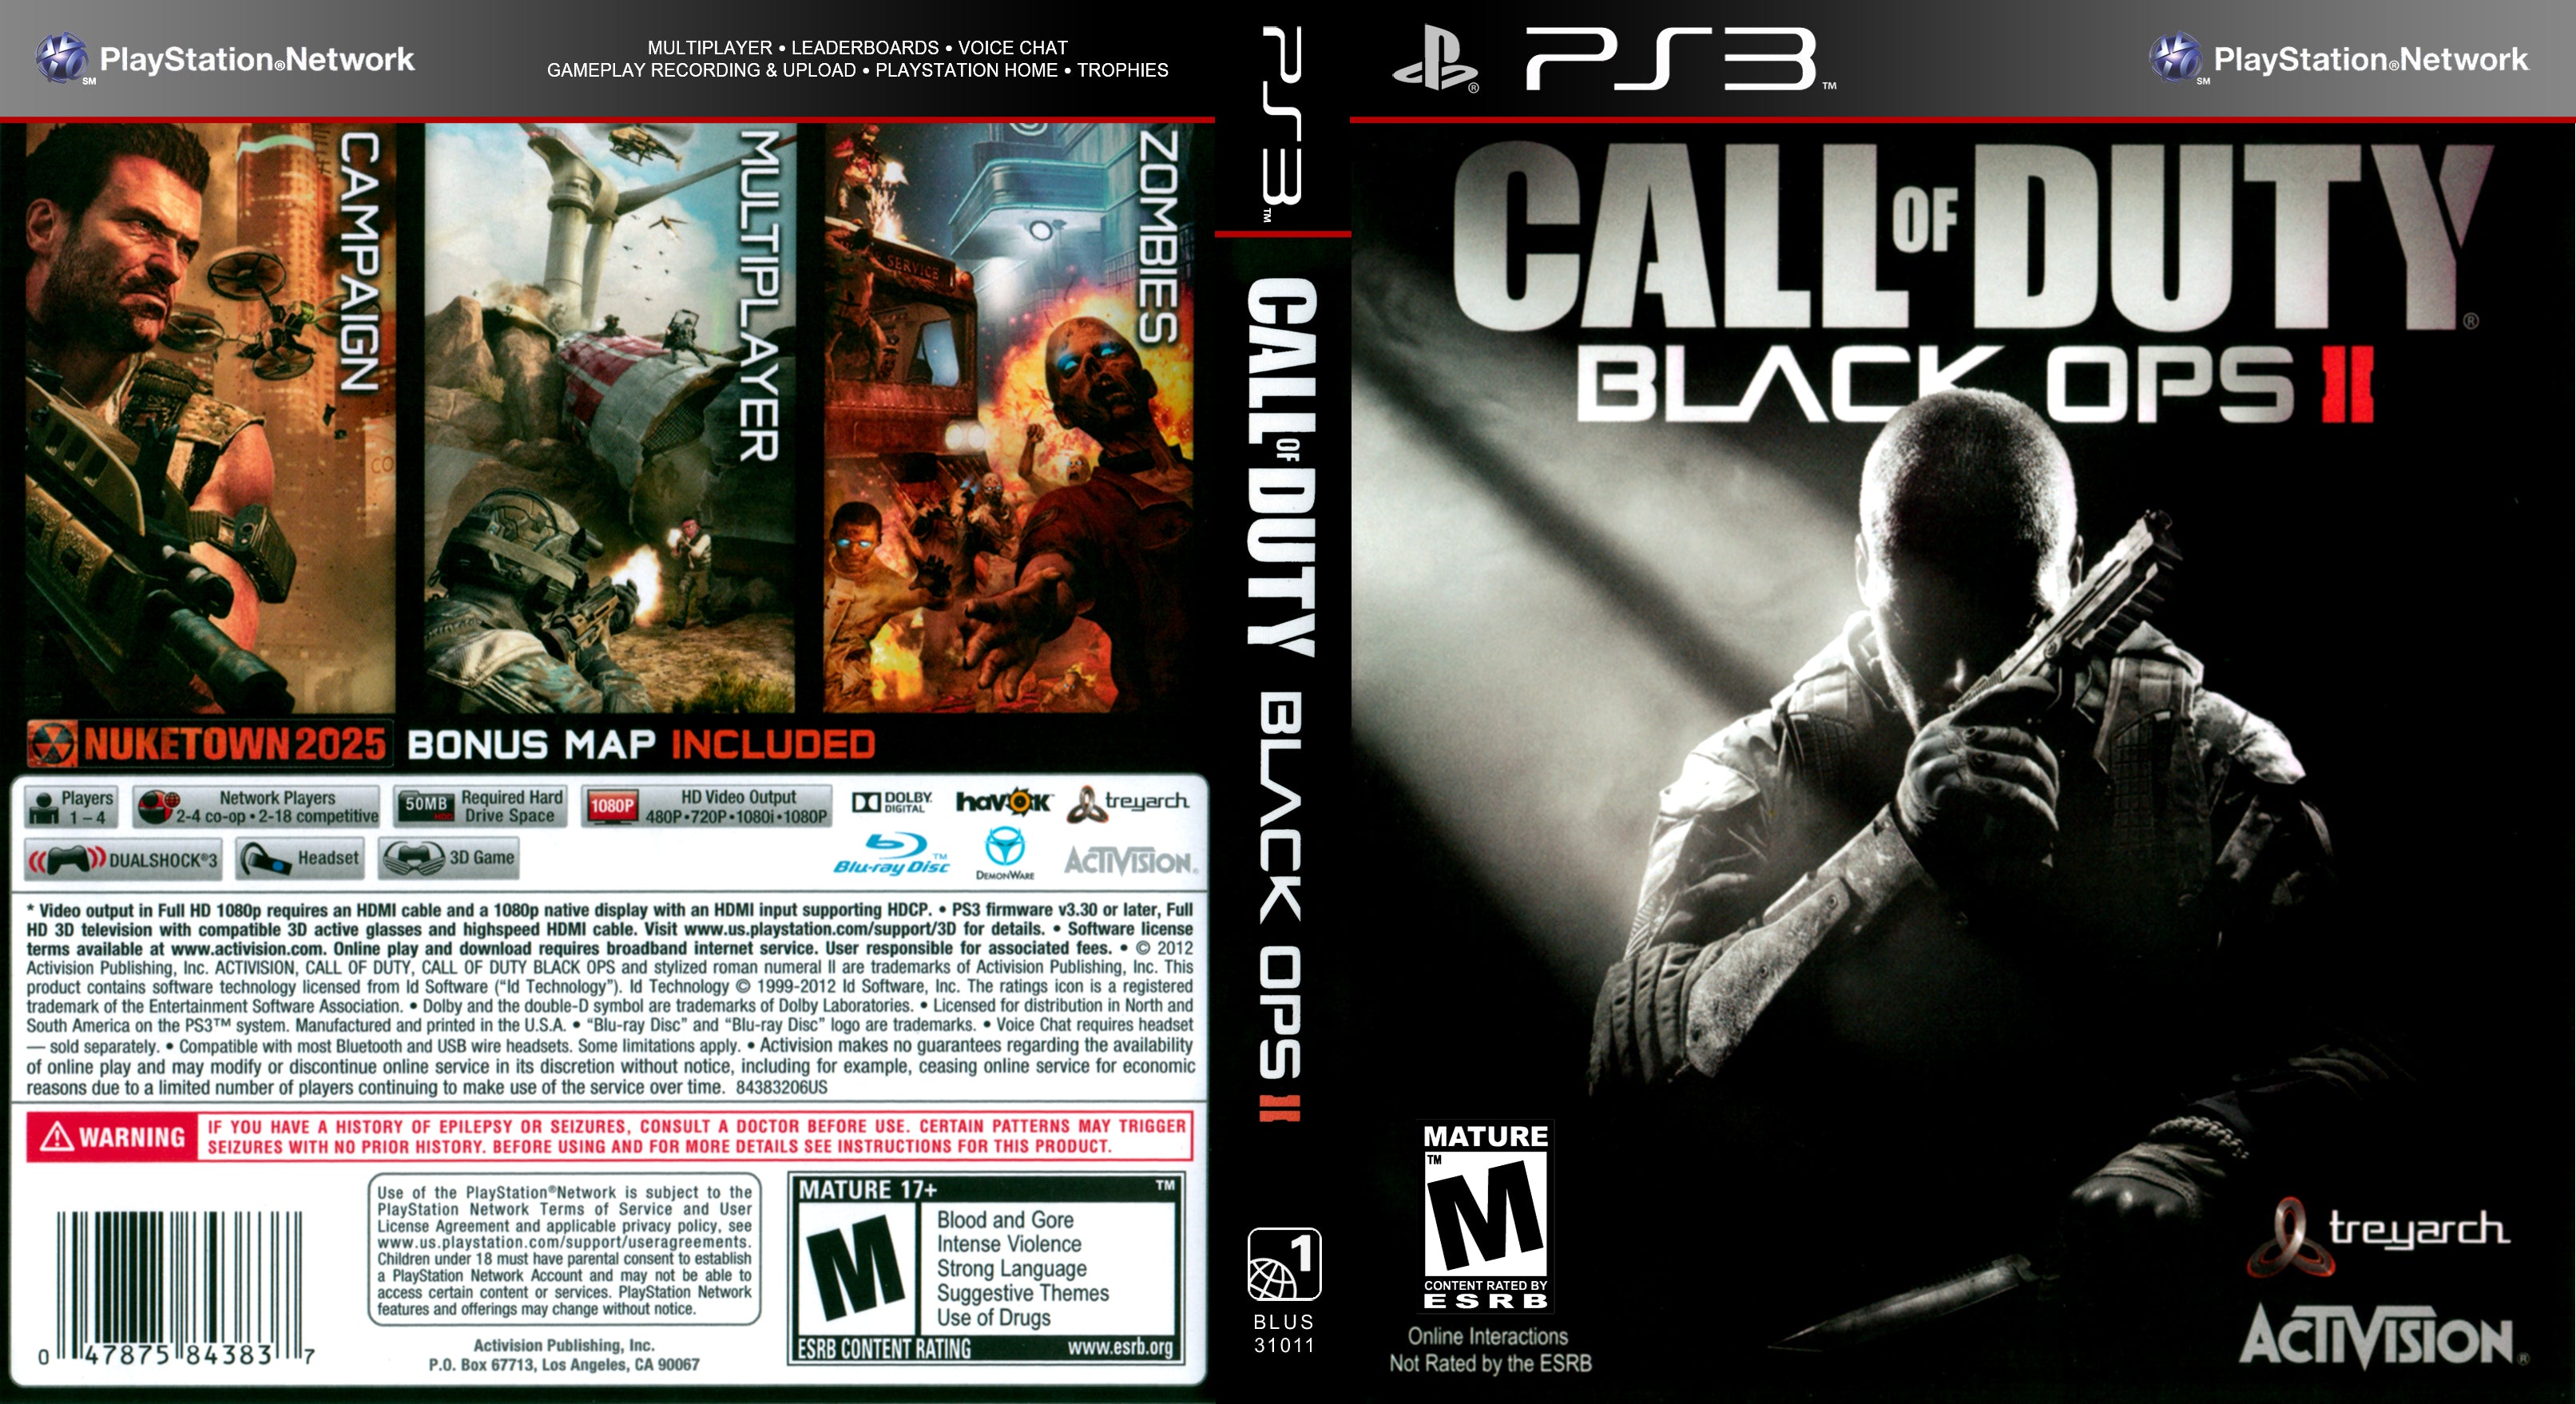 Call of Duty Black Ops II Pro Edition para Xbox 360 e PS3